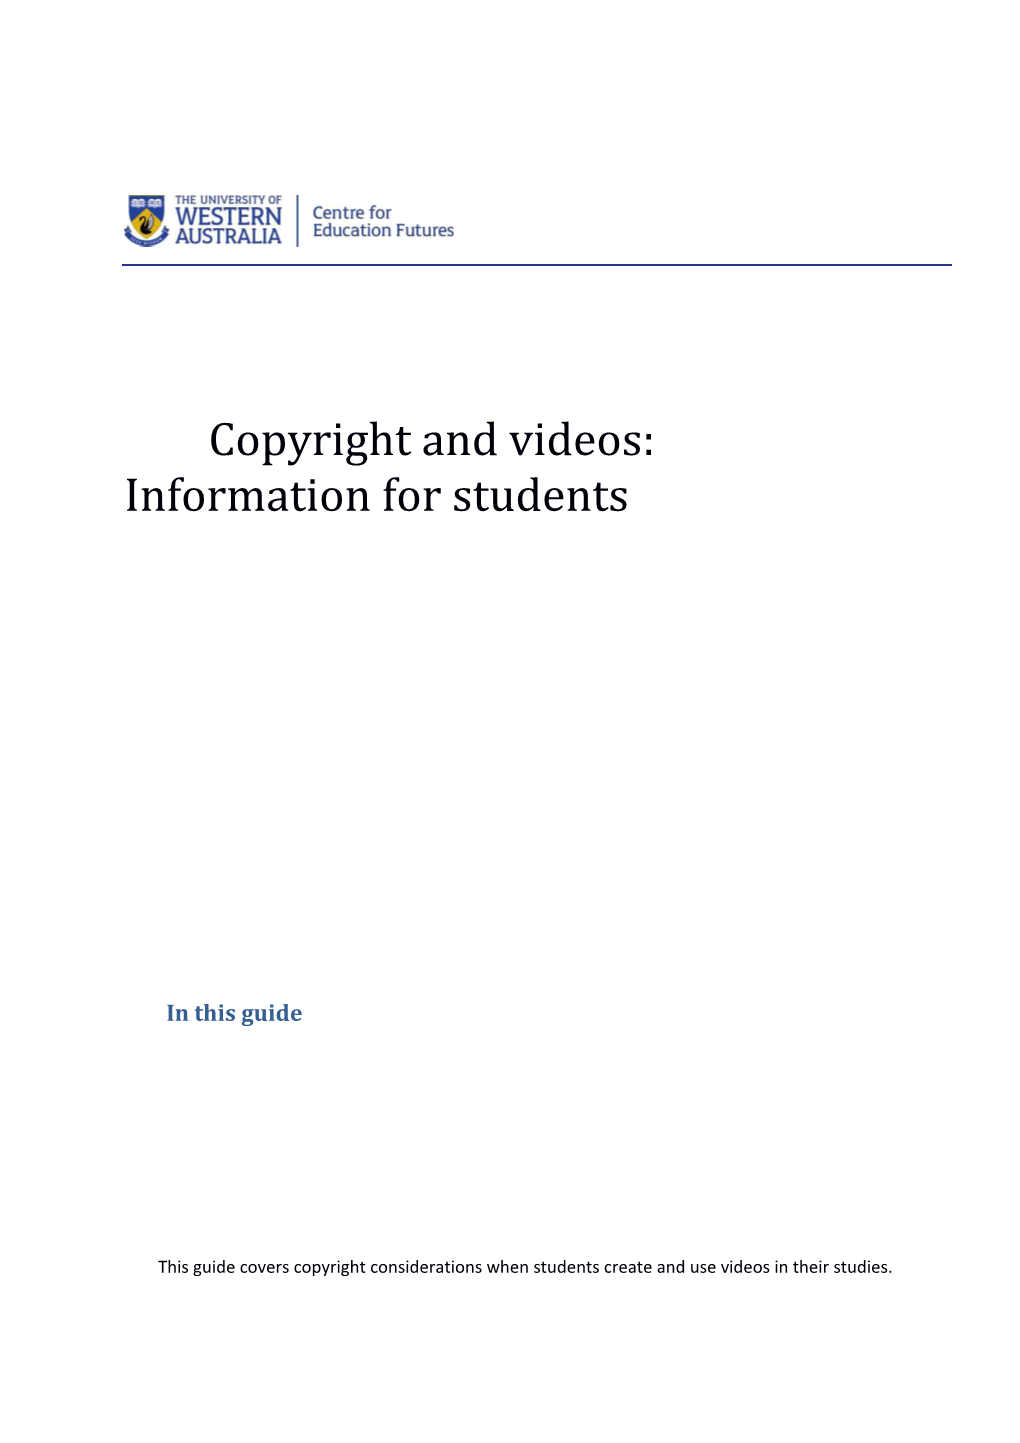 Copyright and Videos: Information for Students